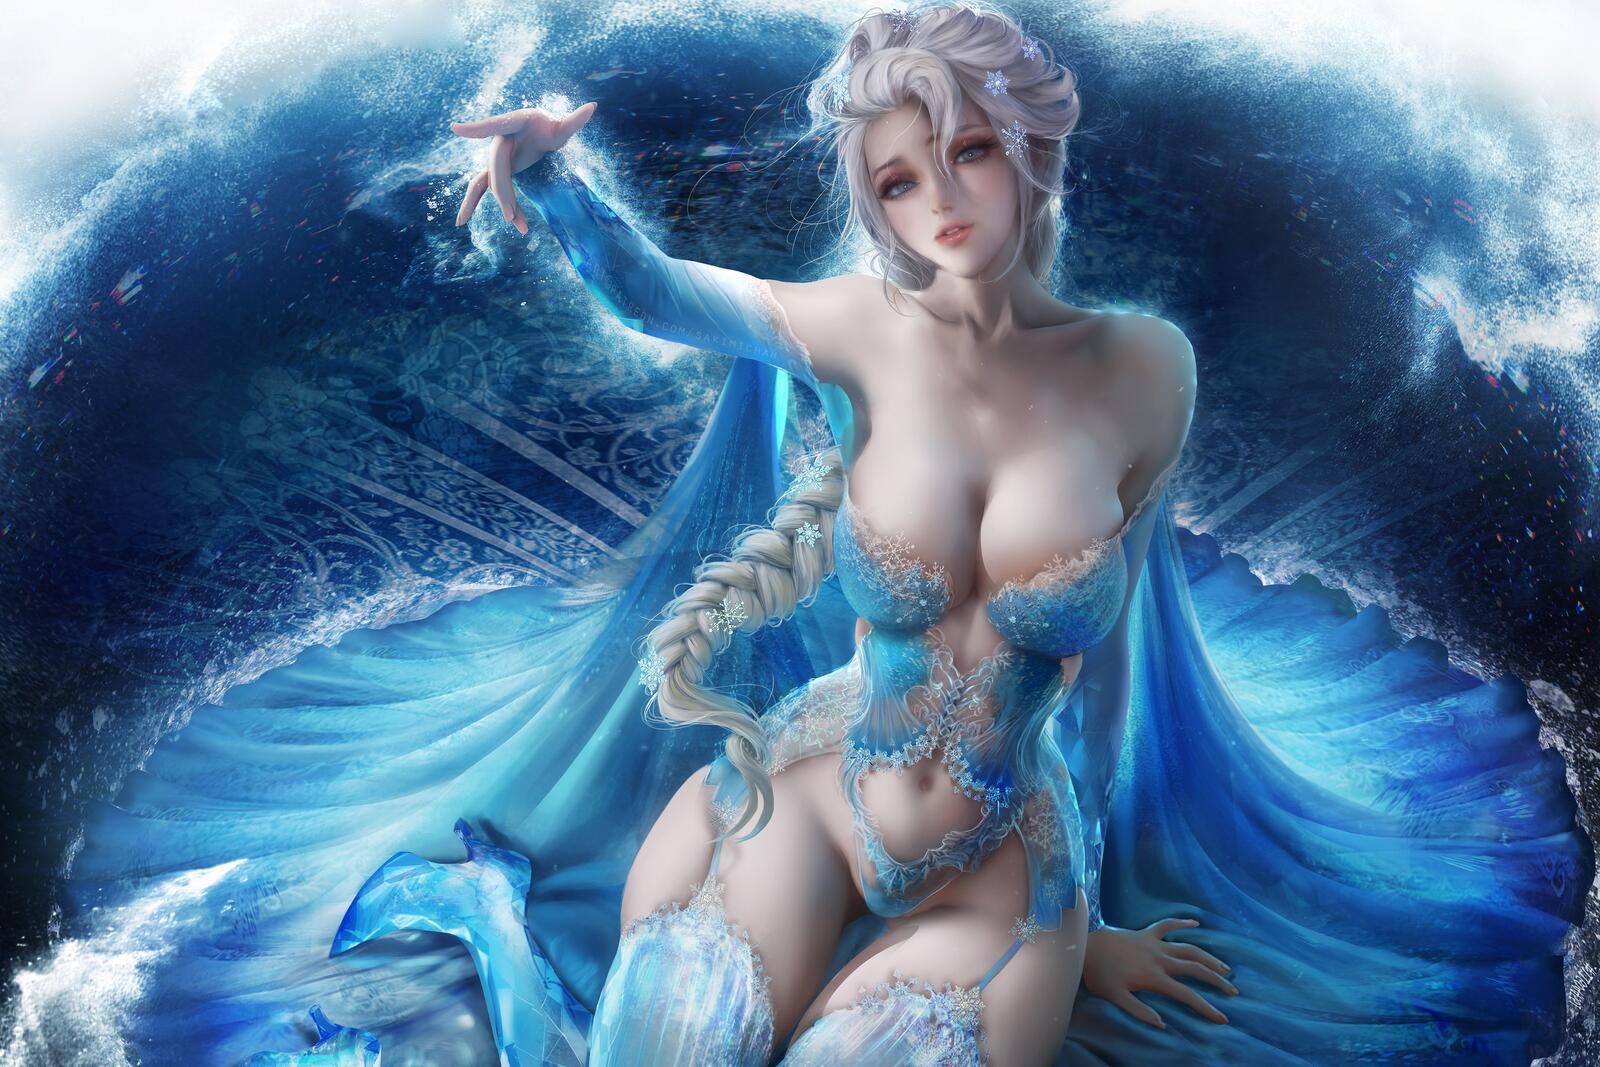 Free photo The sea goddess who rules the waves